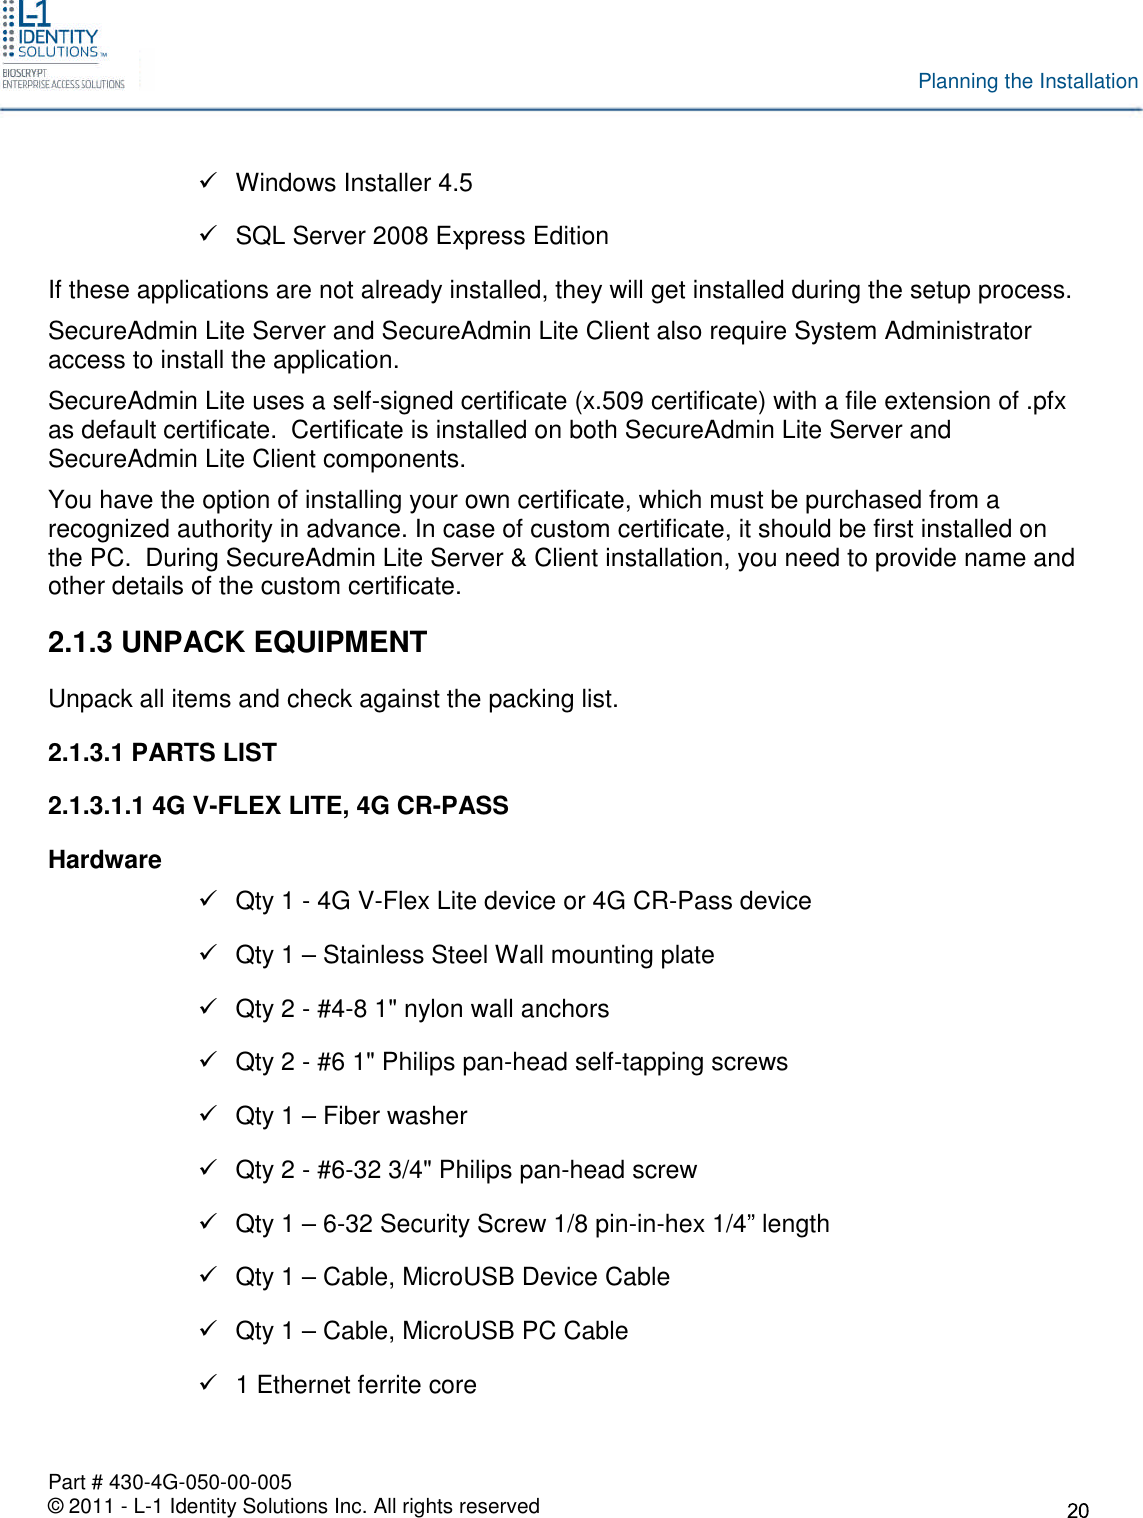 Part # 430-4G-050-00-005© 2011 - L-1 Identity Solutions Inc. All rights reservedPlanning the InstallationWindows Installer 4.5SQL Server 2008 Express EditionIf these applications are not already installed, they will get installed during the setup process.SecureAdmin Lite Server and SecureAdmin Lite Client also require System Administratoraccess to install the application.SecureAdmin Lite uses a self-signed certificate (x.509 certificate) with a file extension of .pfxas default certificate. Certificate is installed on both SecureAdmin Lite Server andSecureAdmin Lite Client components.You have the option of installing your own certificate, which must be purchased from arecognized authority in advance. In case of custom certificate, it should be first installed onthe PC. During SecureAdmin Lite Server &amp; Client installation, you need to provide name andother details of the custom certificate.2.1.3 UNPACK EQUIPMENTUnpack all items and check against the packing list.2.1.3.1 PARTS LIST2.1.3.1.1 4G V-FLEX LITE, 4G CR-PASSHardwareQty 1 - 4G V-Flex Lite device or 4G CR-Pass deviceQty 1 – Stainless Steel Wall mounting plateQty 2 - #4-8 1&quot; nylon wall anchorsQty 2 - #6 1&quot; Philips pan-head self-tapping screwsQty 1 – Fiber washerQty 2 - #6-32 3/4&quot; Philips pan-head screwQty 1 – 6-32 Security Screw 1/8 pin-in-hex 1/4” lengthQty 1 – Cable, MicroUSB Device CableQty 1 – Cable, MicroUSB PC Cable1 Ethernet ferrite core